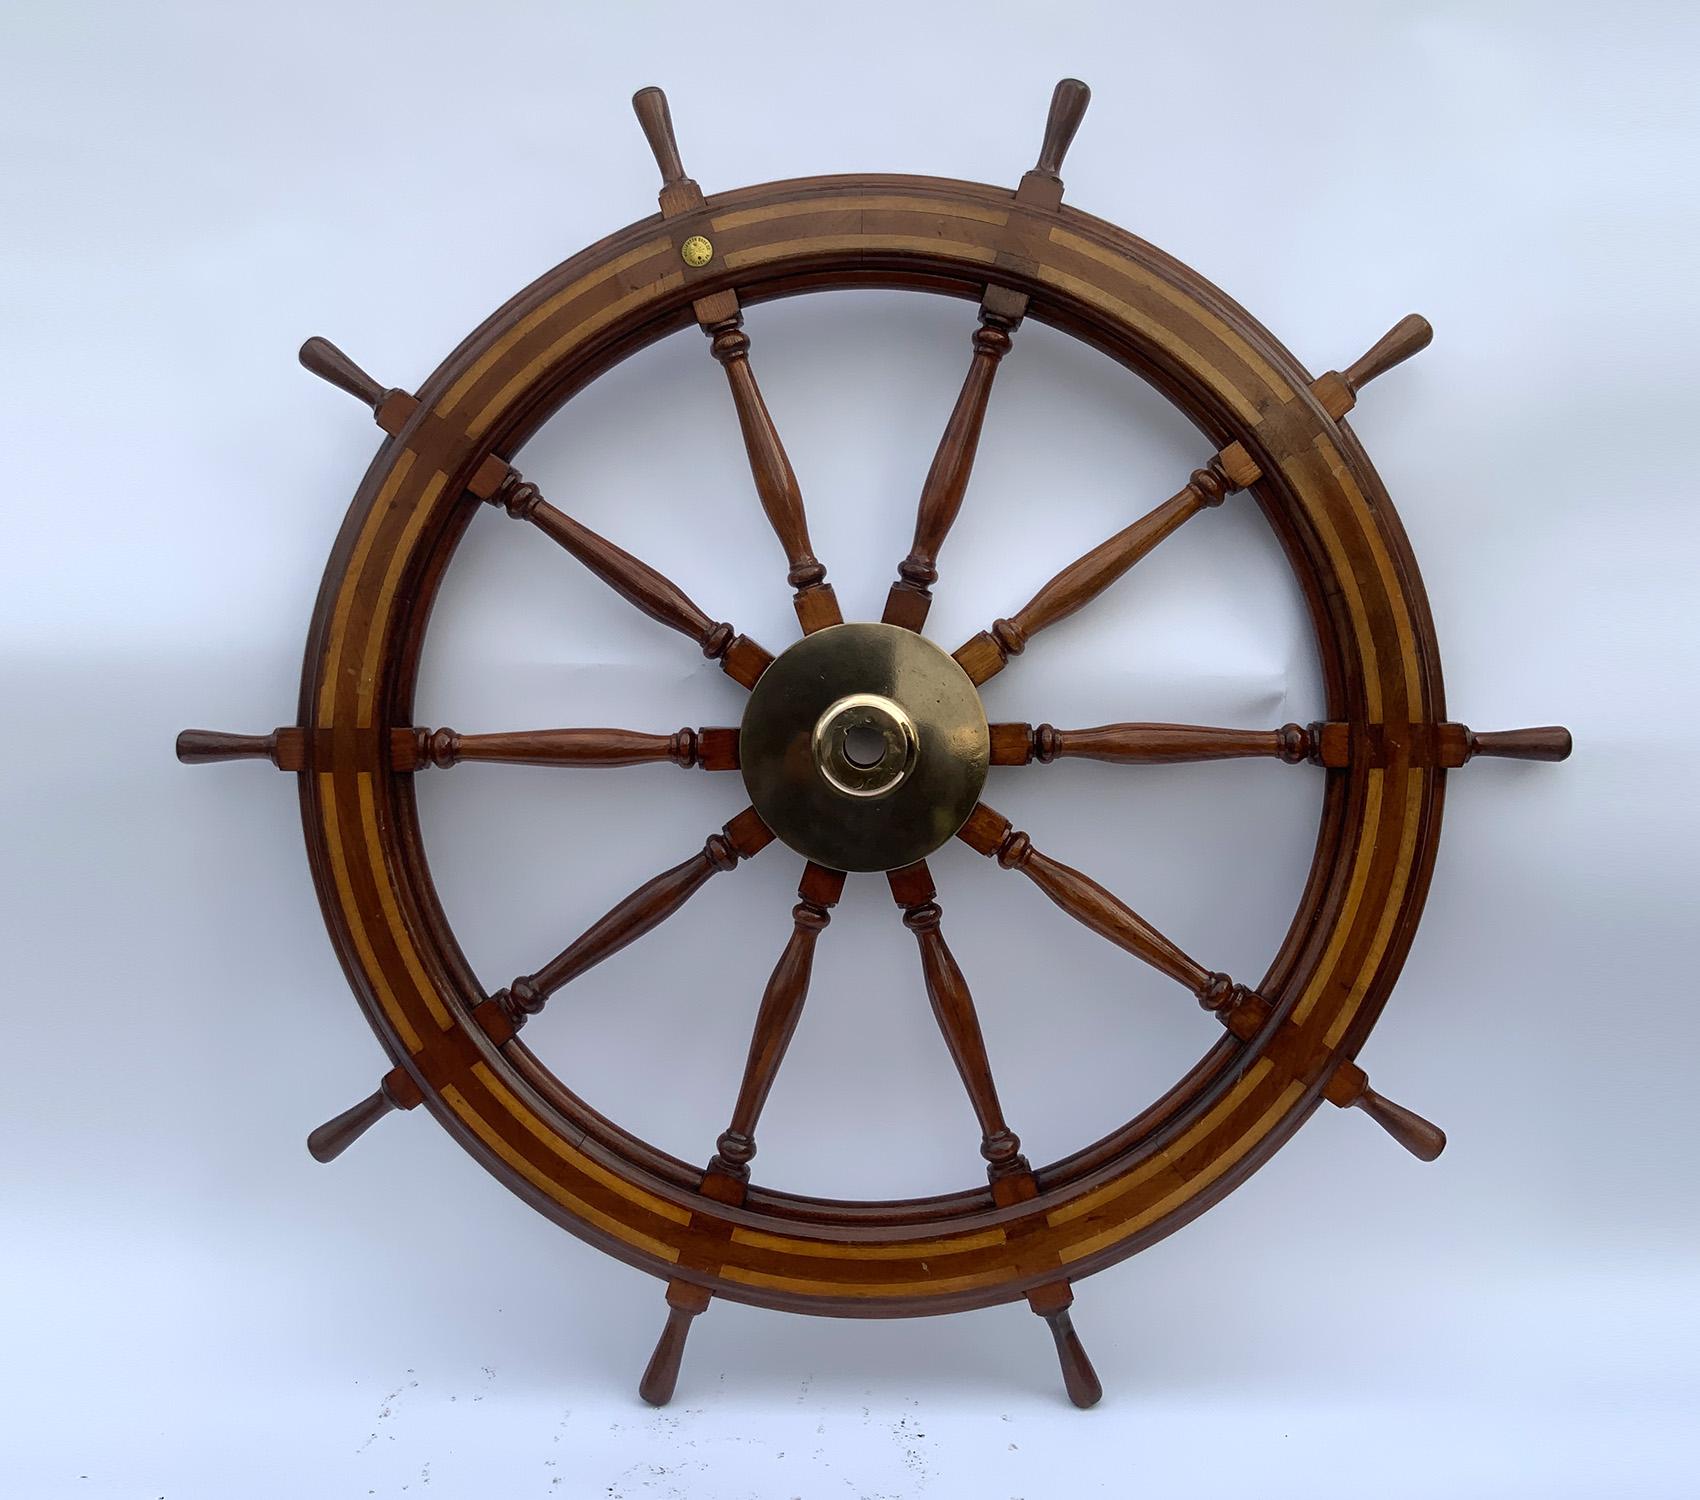 Exceptional sixty-four-inch mahogany ships wheel with maple inlay. Round brass medallion marked with makers name of Williamson Brothers of Philadelphia. Large solid brass hub. Note: There are some gouges on the hub on the rear side of the wheel,